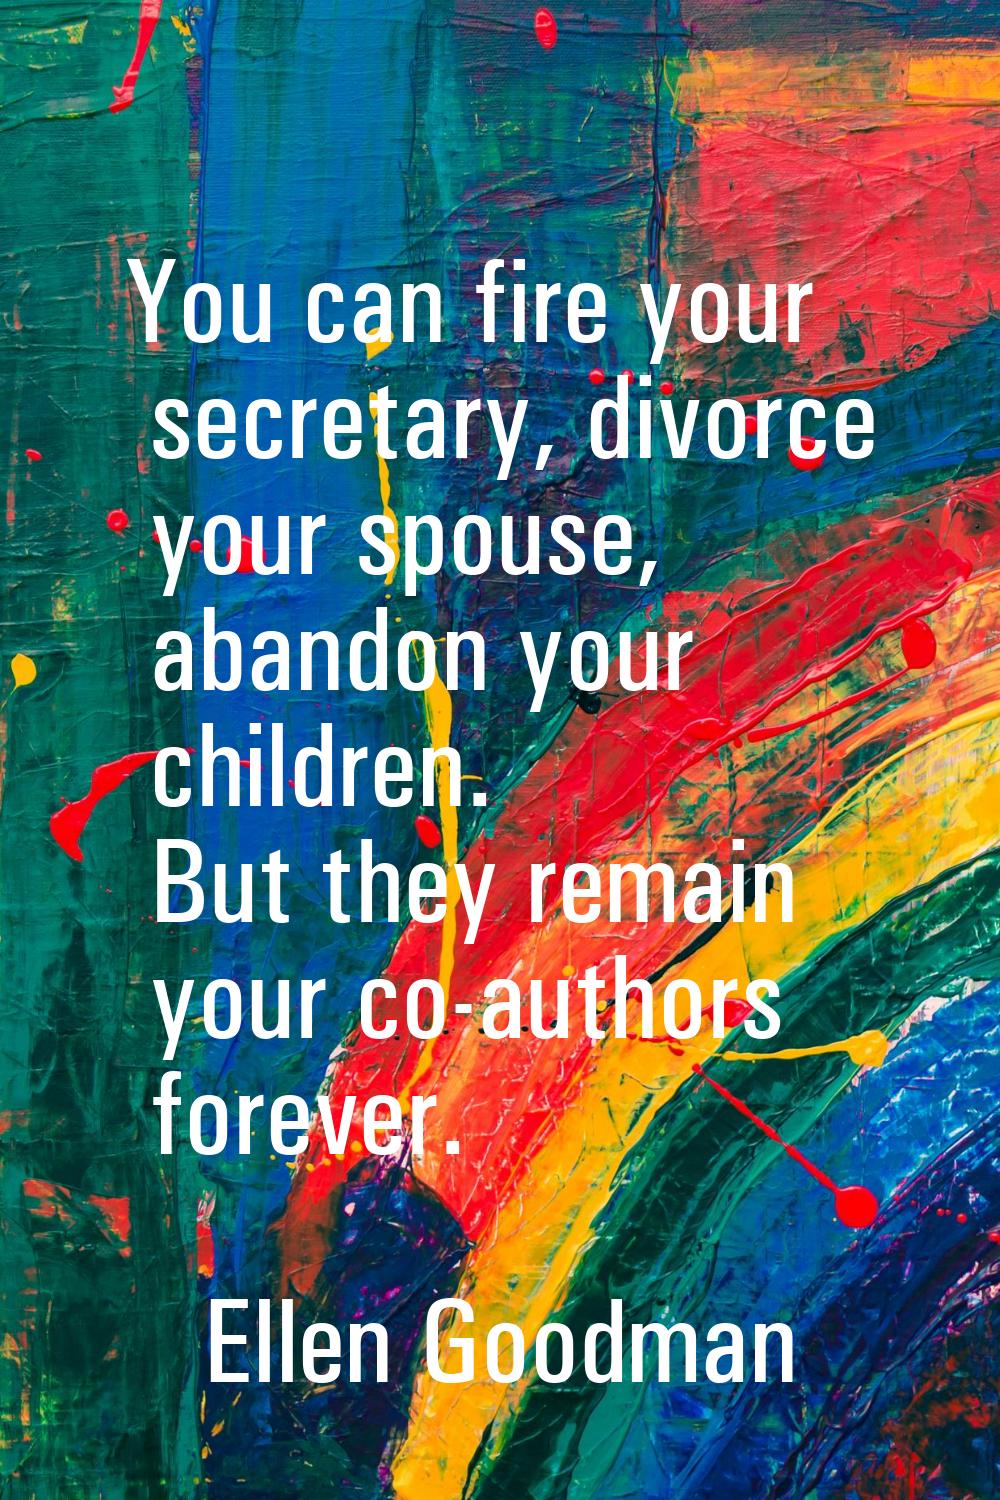 You can fire your secretary, divorce your spouse, abandon your children. But they remain your co-au